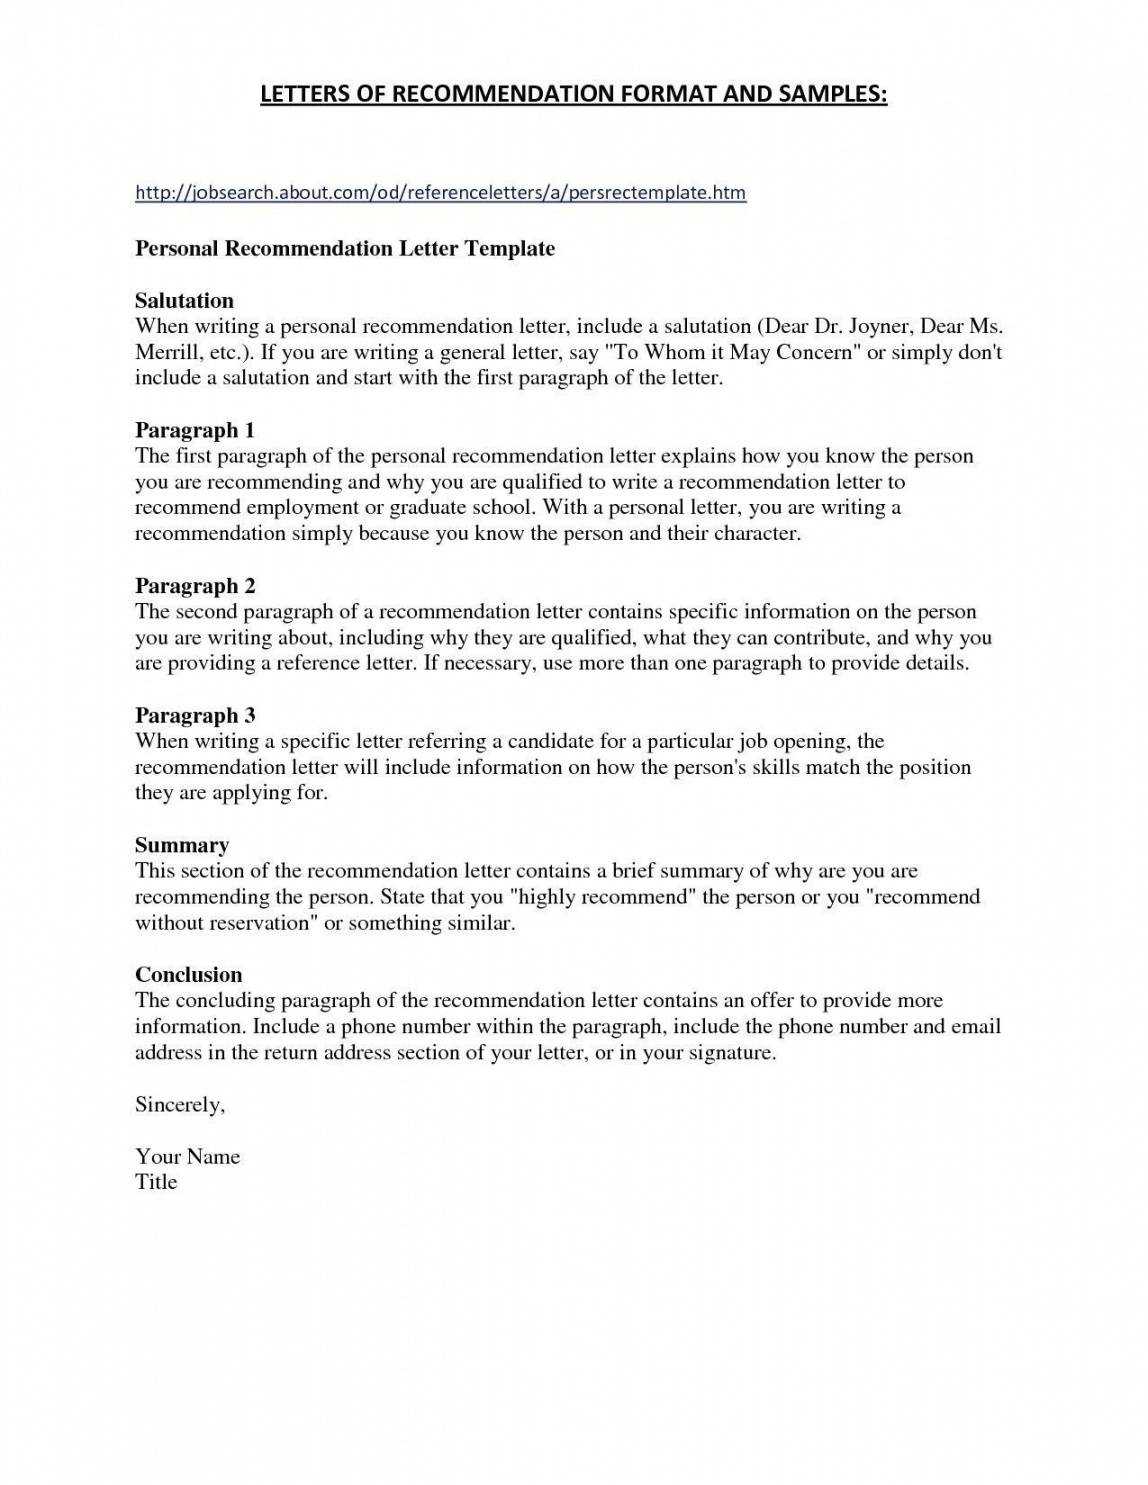 Sample Template For Letter Of Recommendation Collection With Regard To Recommendation Report Template